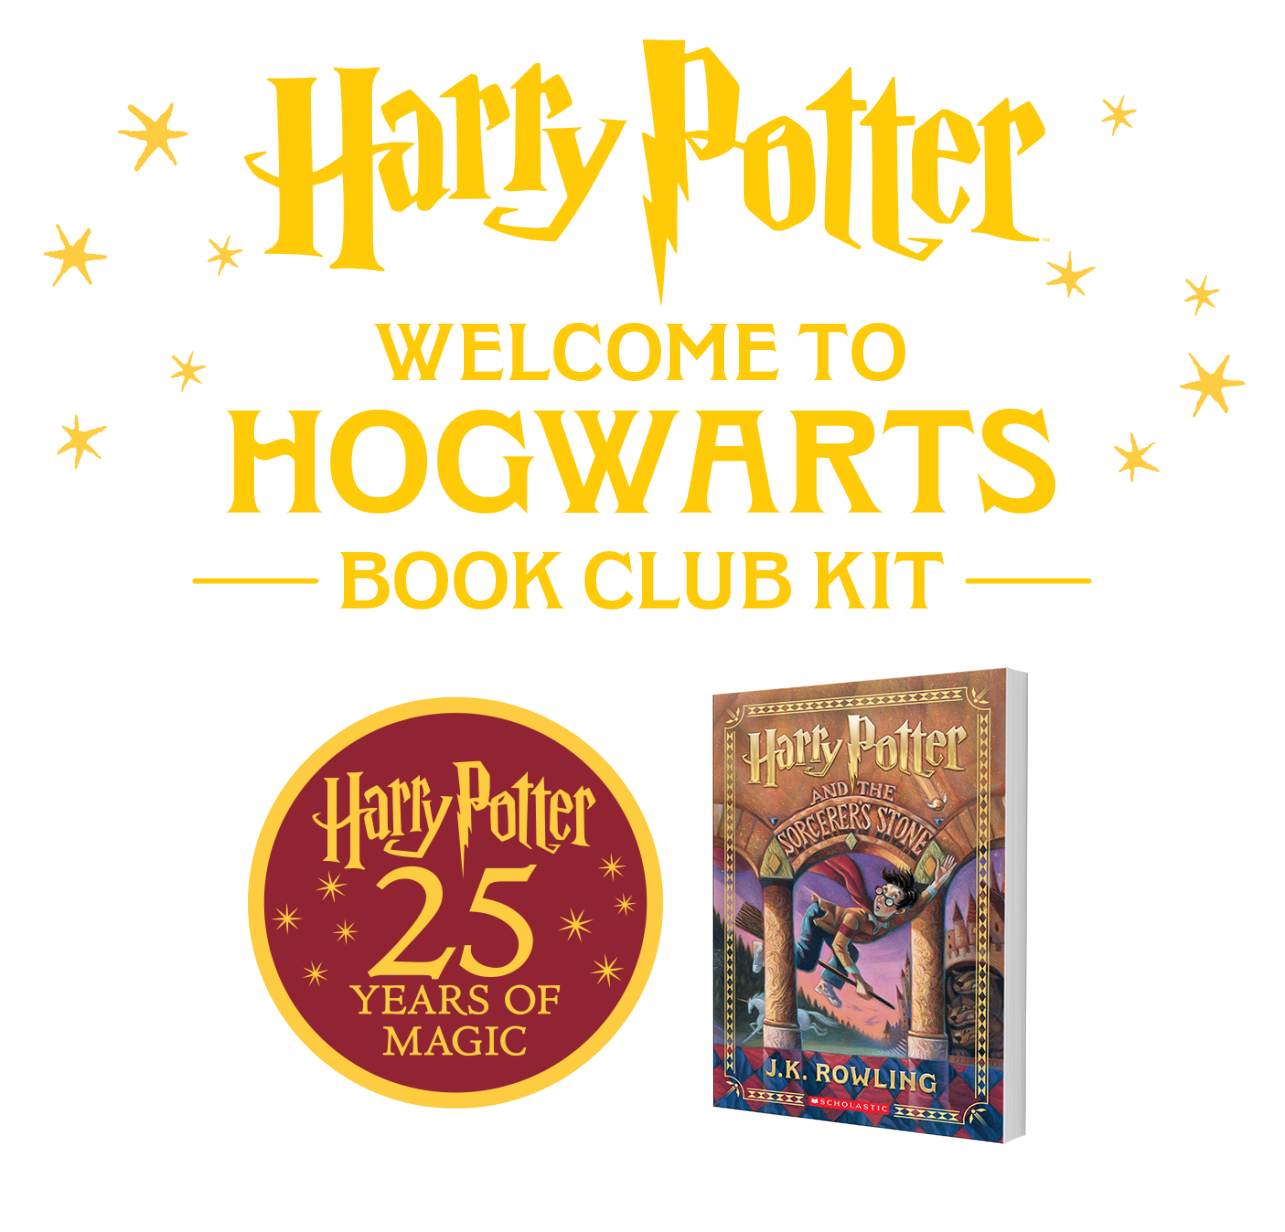 Ready to meet one of the greatest headmasters that Hogwarts™ has ever seen  with this Woobles kit? 